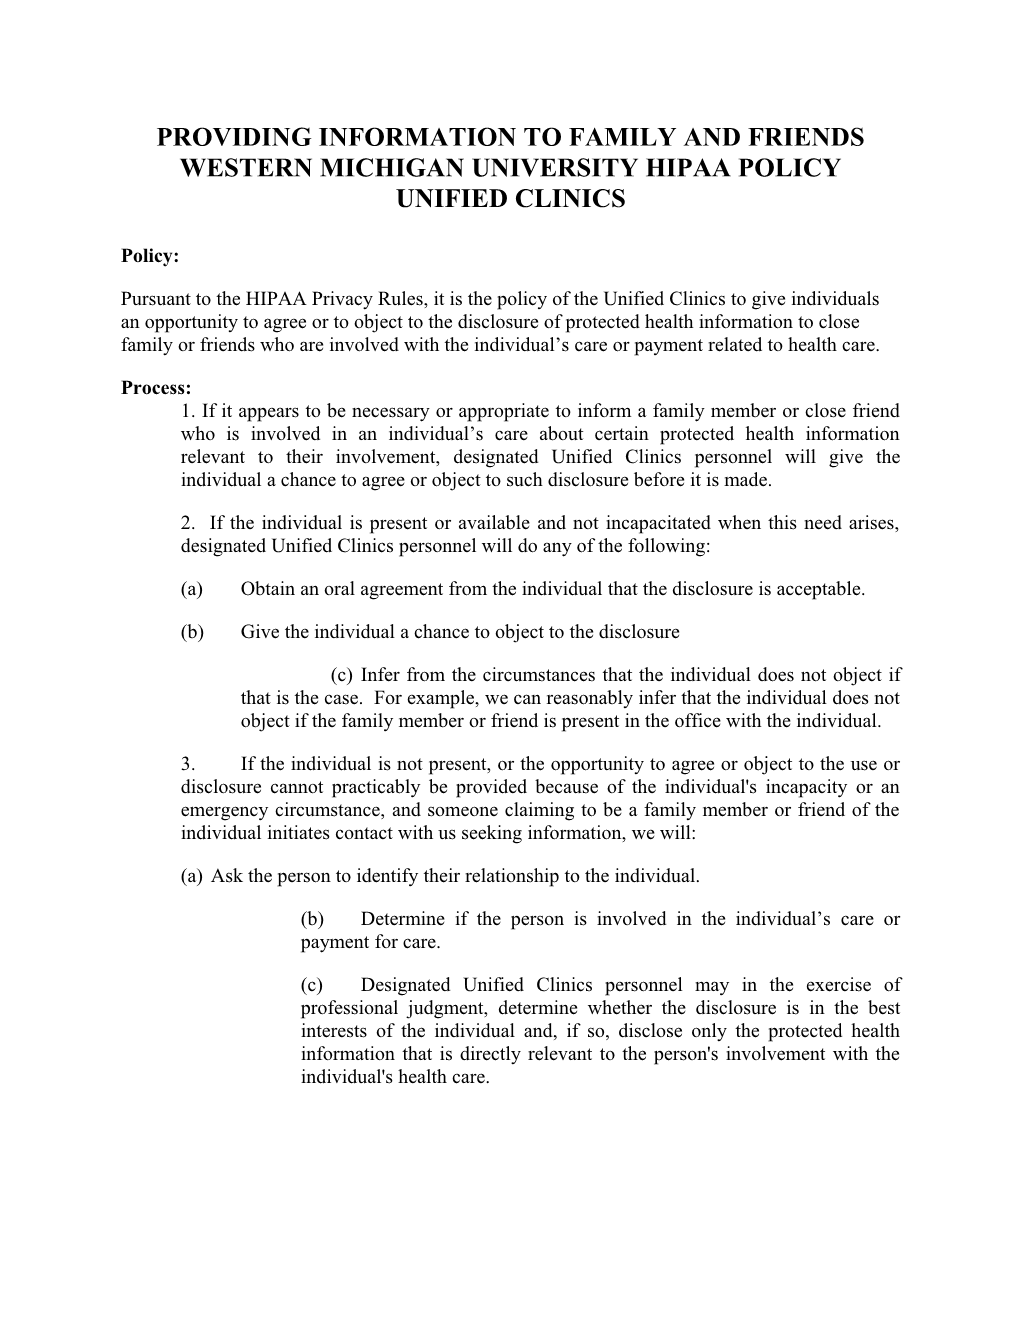 Note Versions 1 & 2 Are Covenant Policies